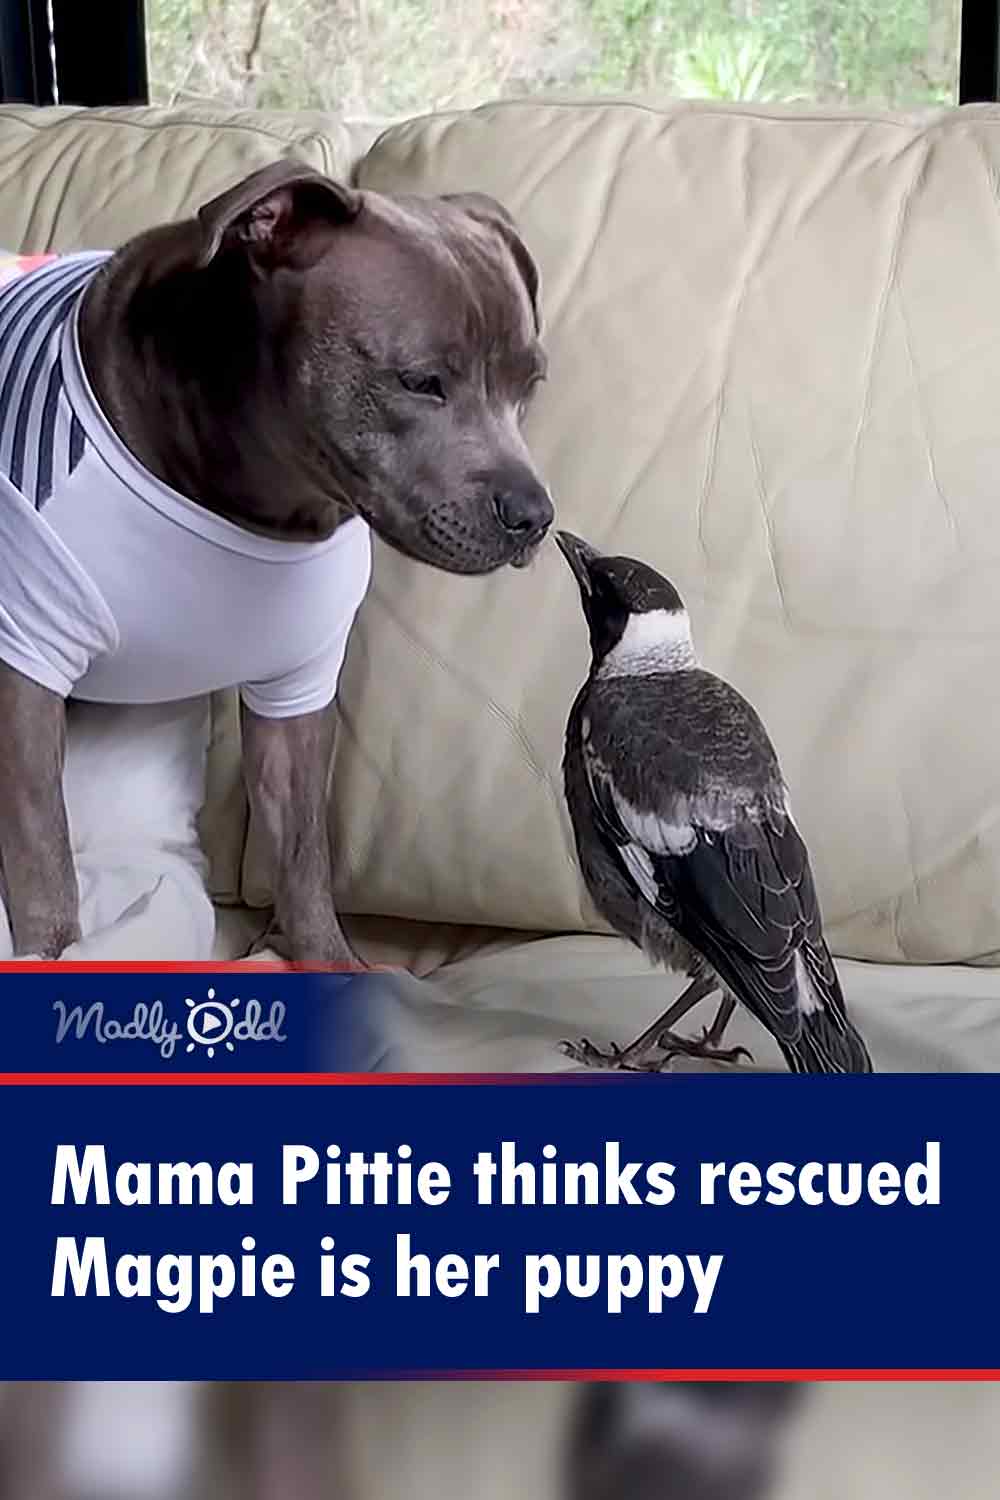 Mama Pittie thinks rescued Magpie is her puppy